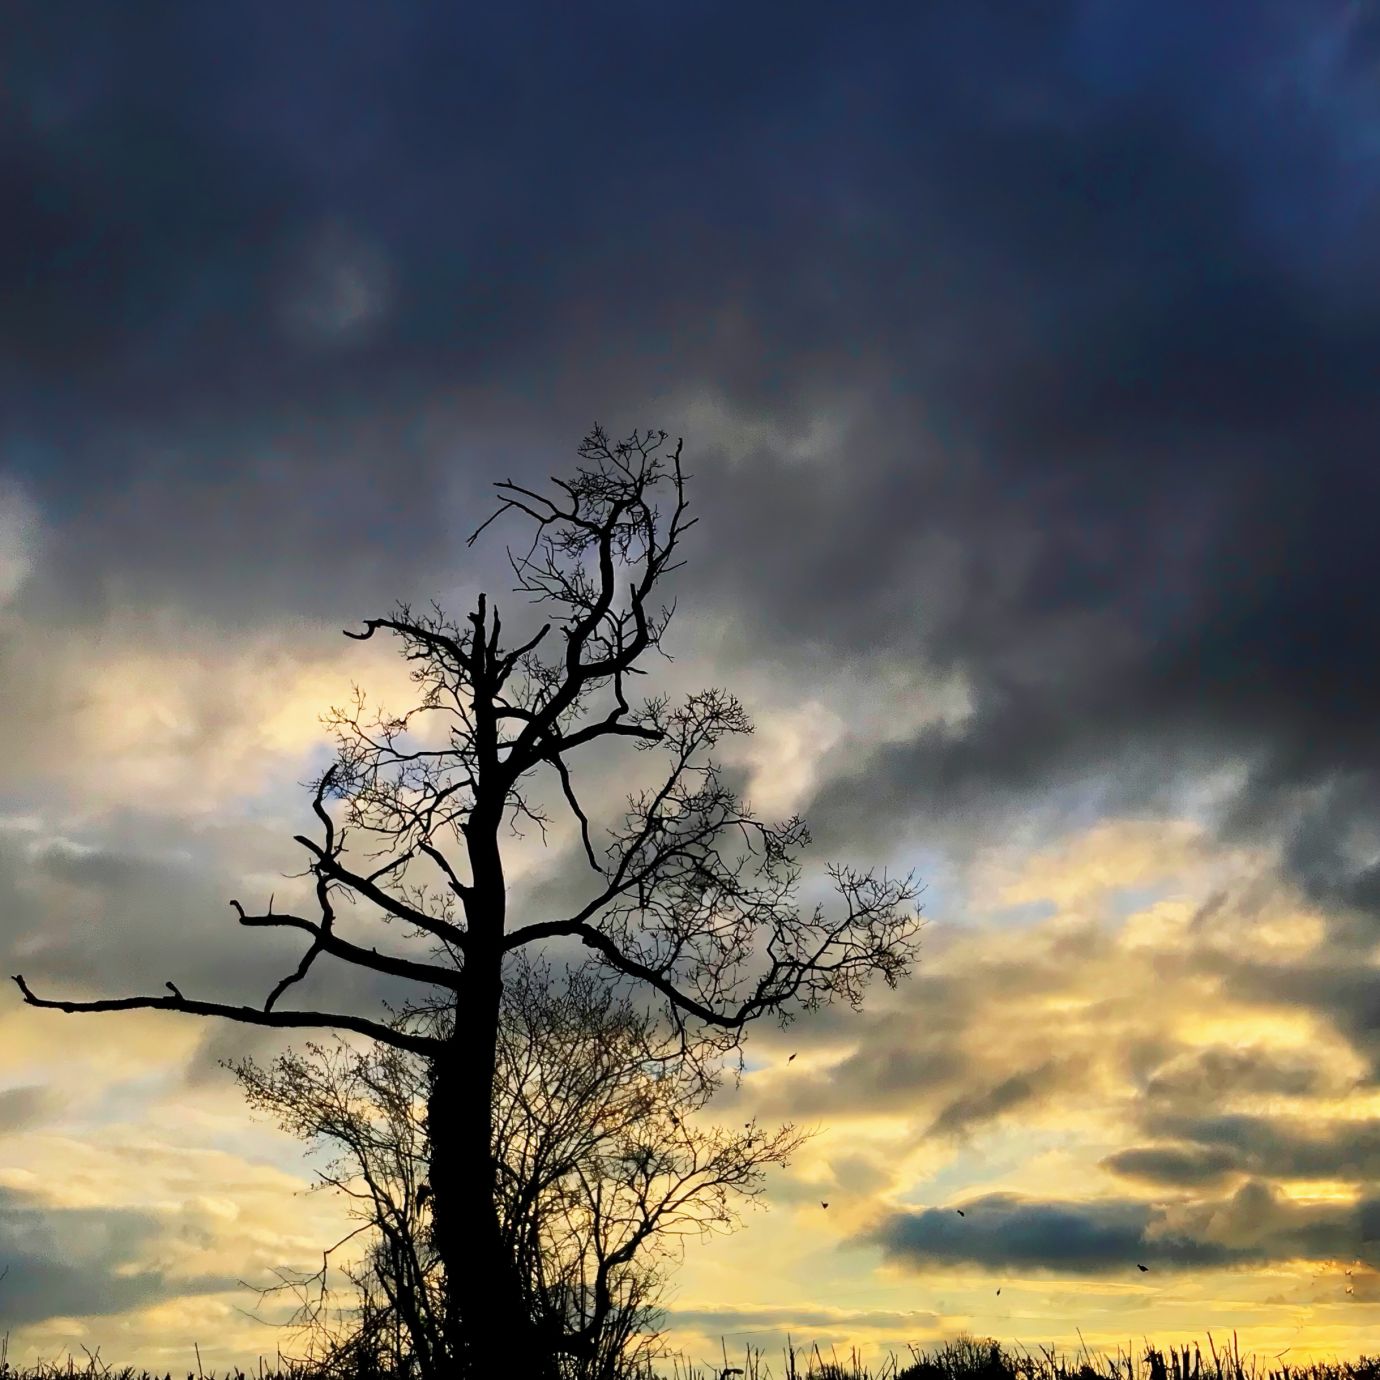 Lone-tree-sunset-Clanville-Hampshire-iphone7-03012021